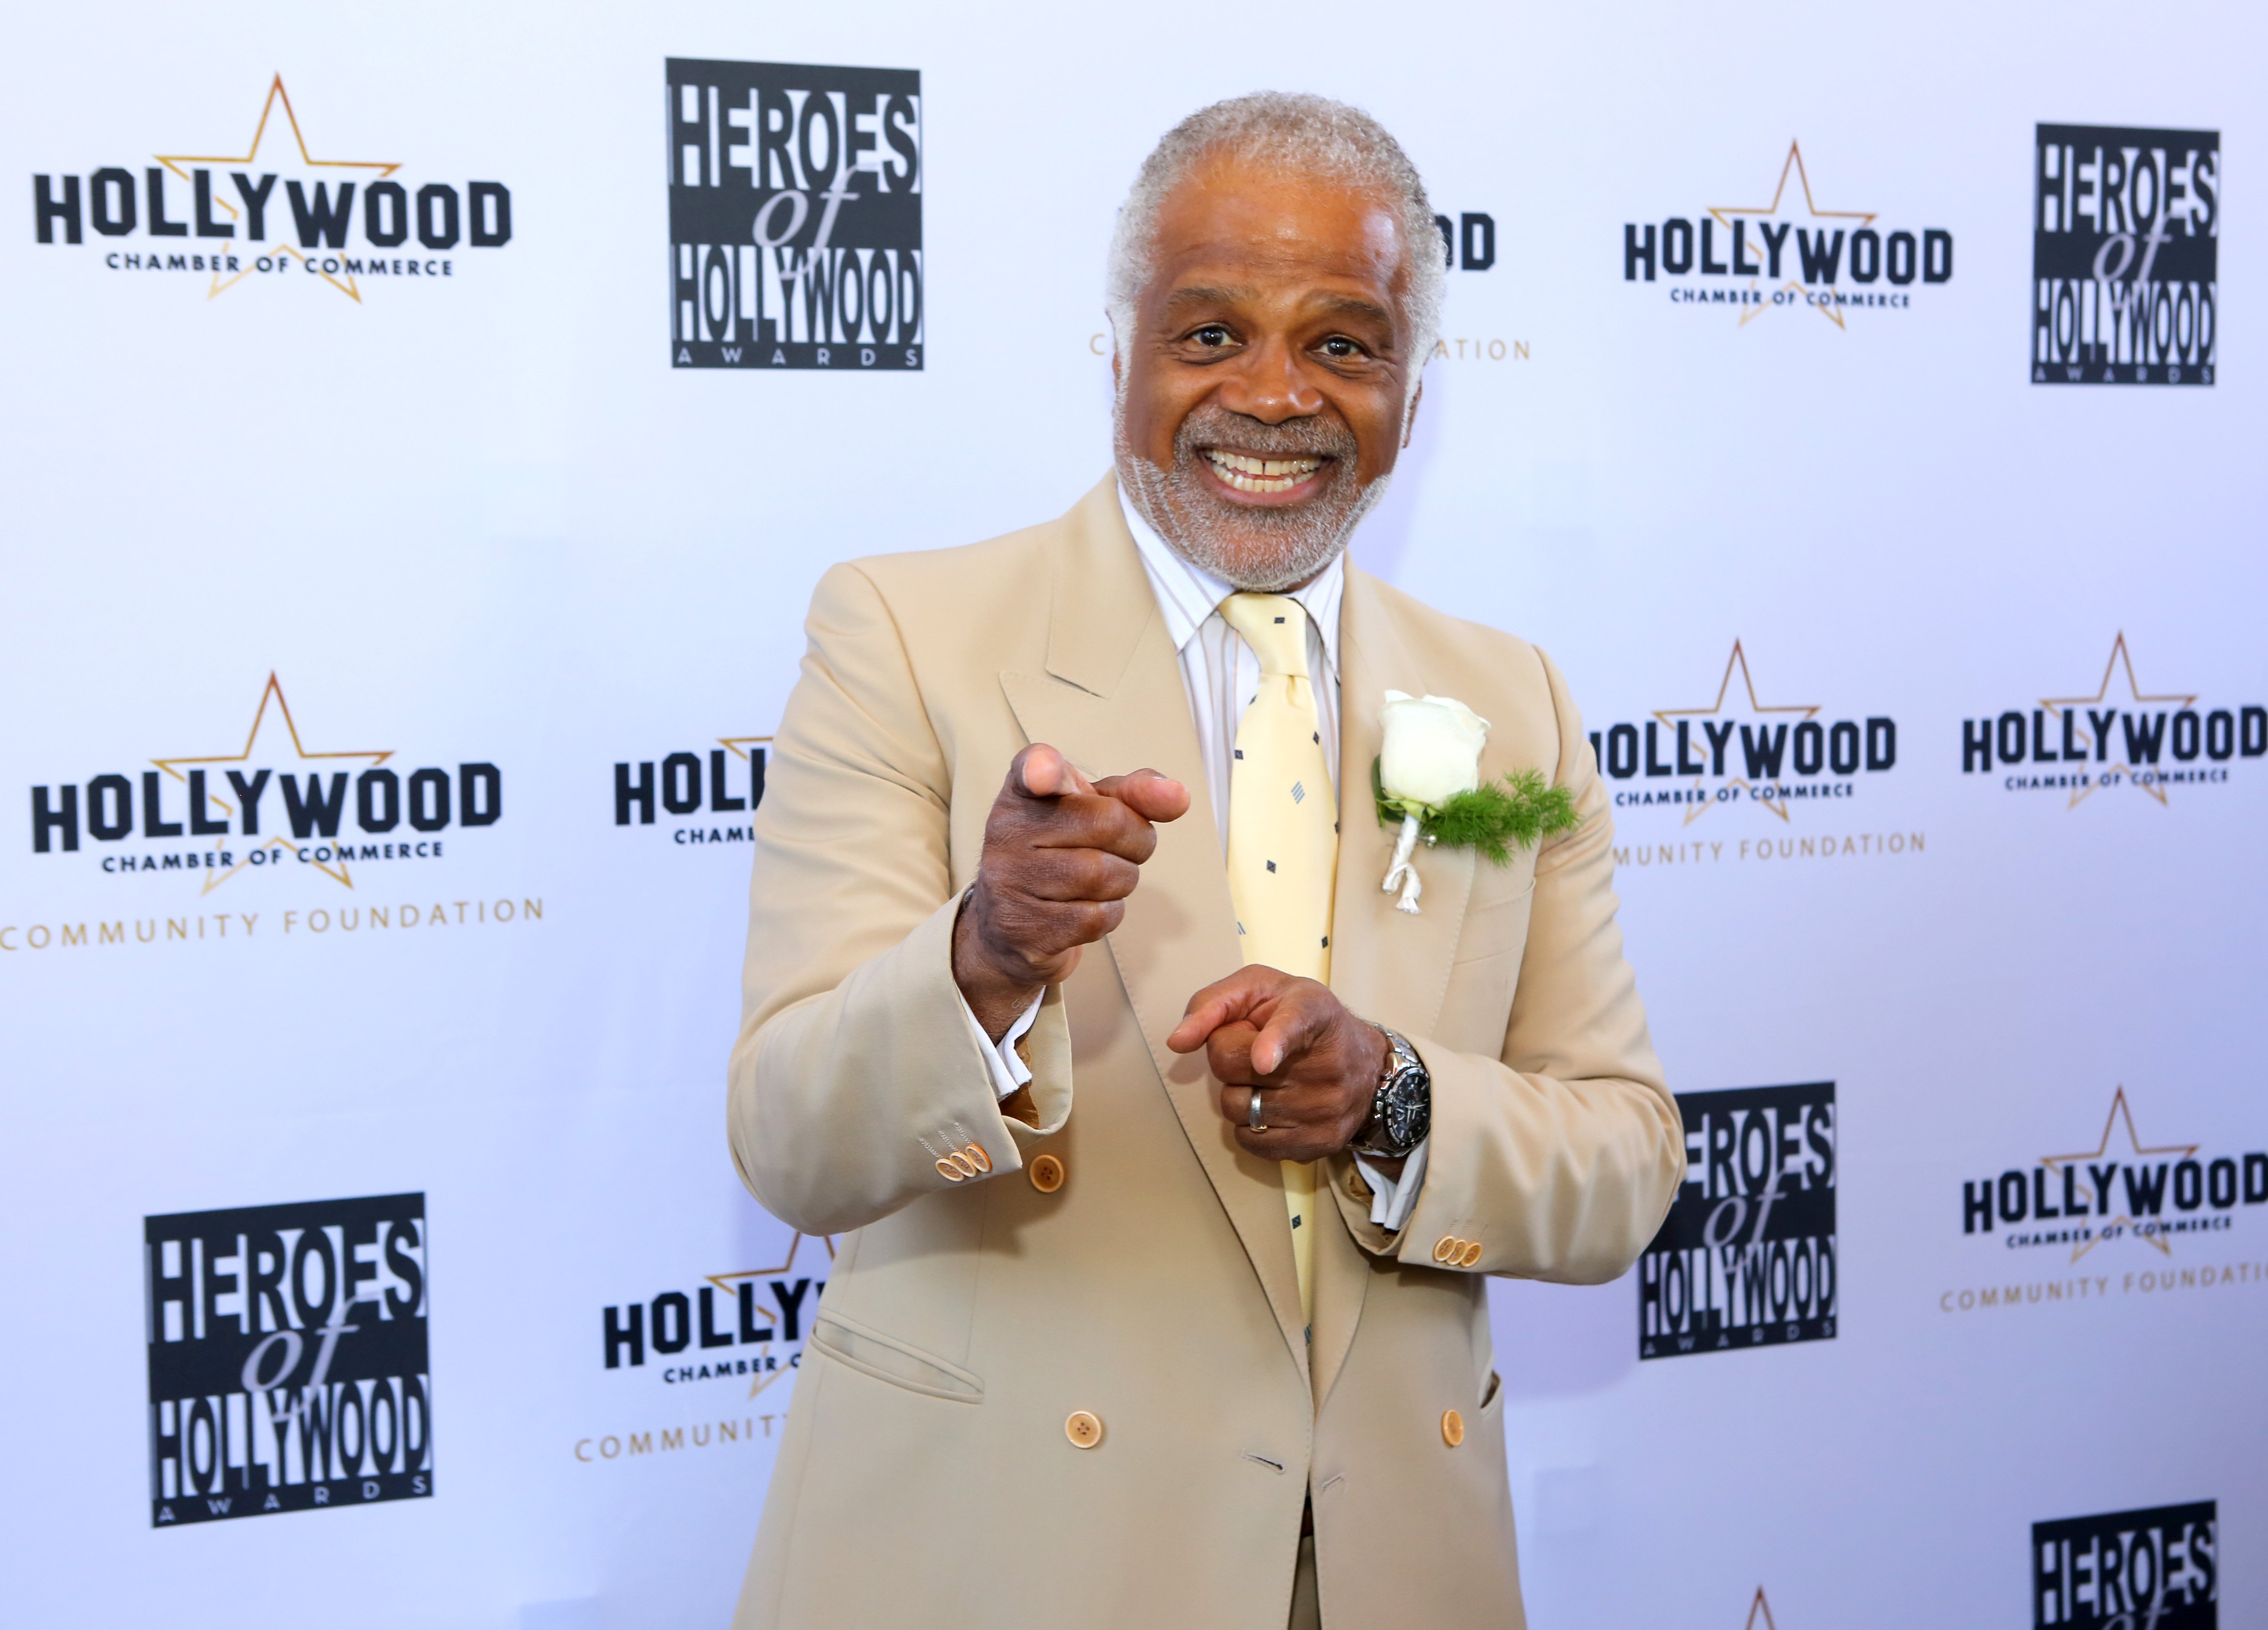 Ted Lange attend The Heroes of Hollywood Awards Luncheon at the Taglyan Cultural Complex on June 06, 2019 | Photo: Getty Images